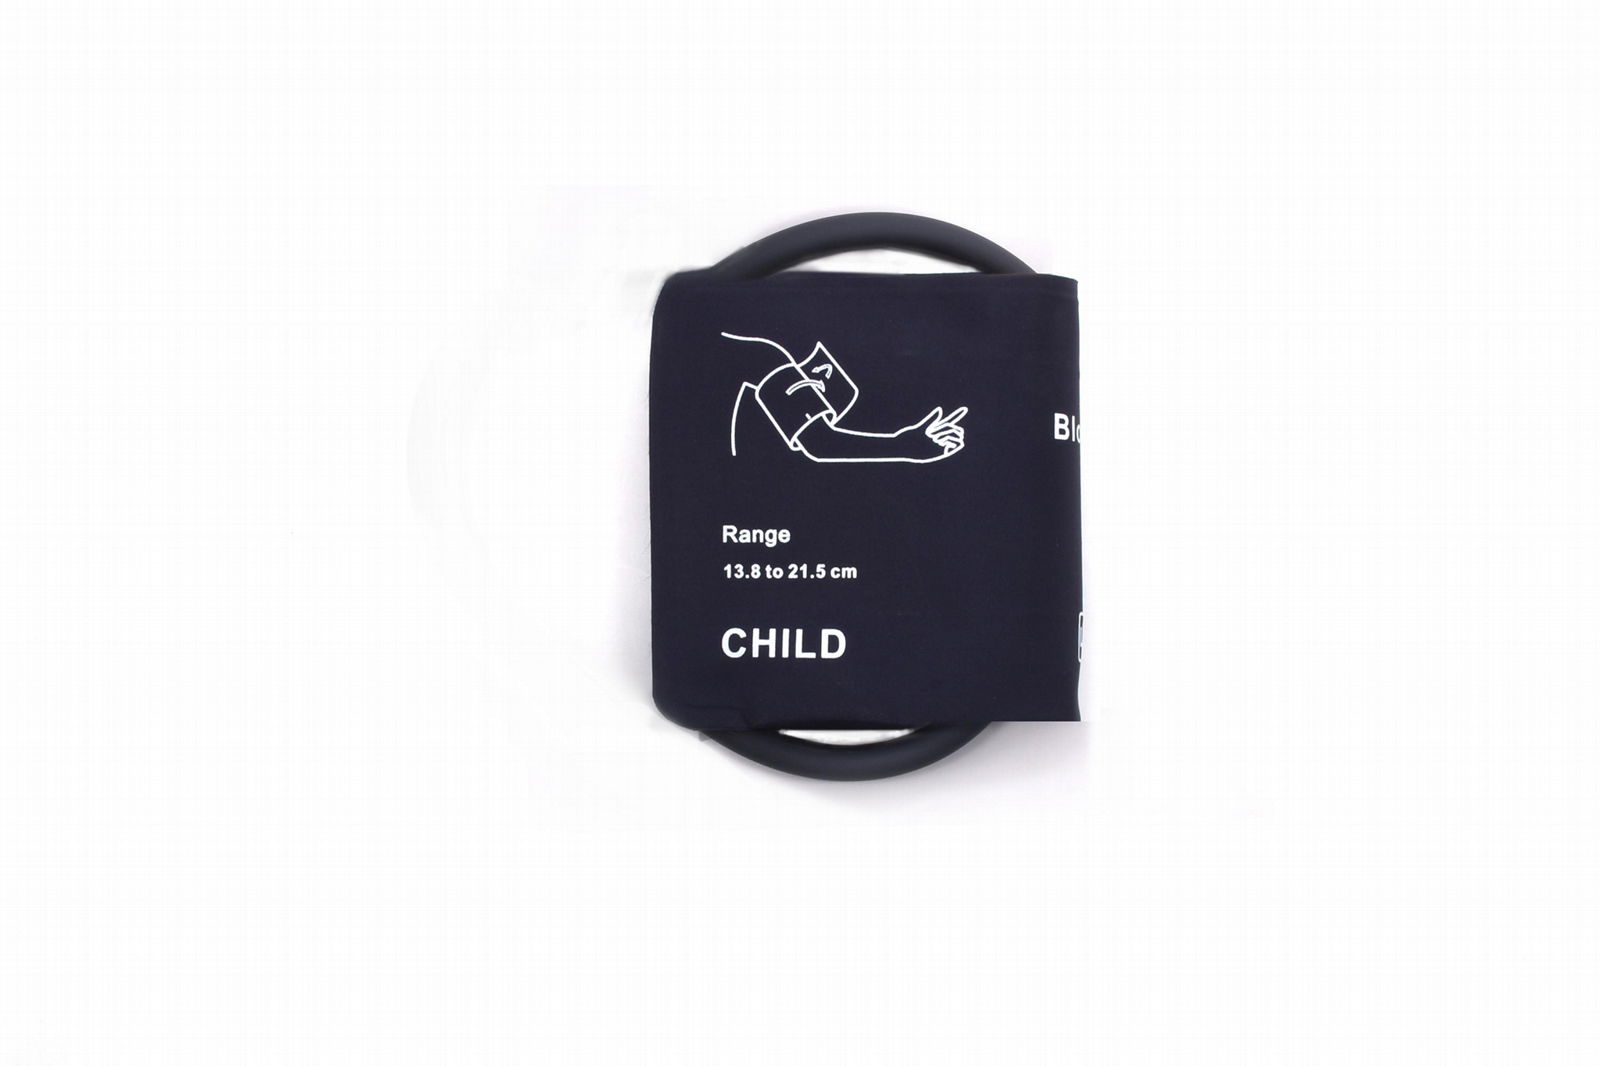 reusable cuff for measuring nibp for children